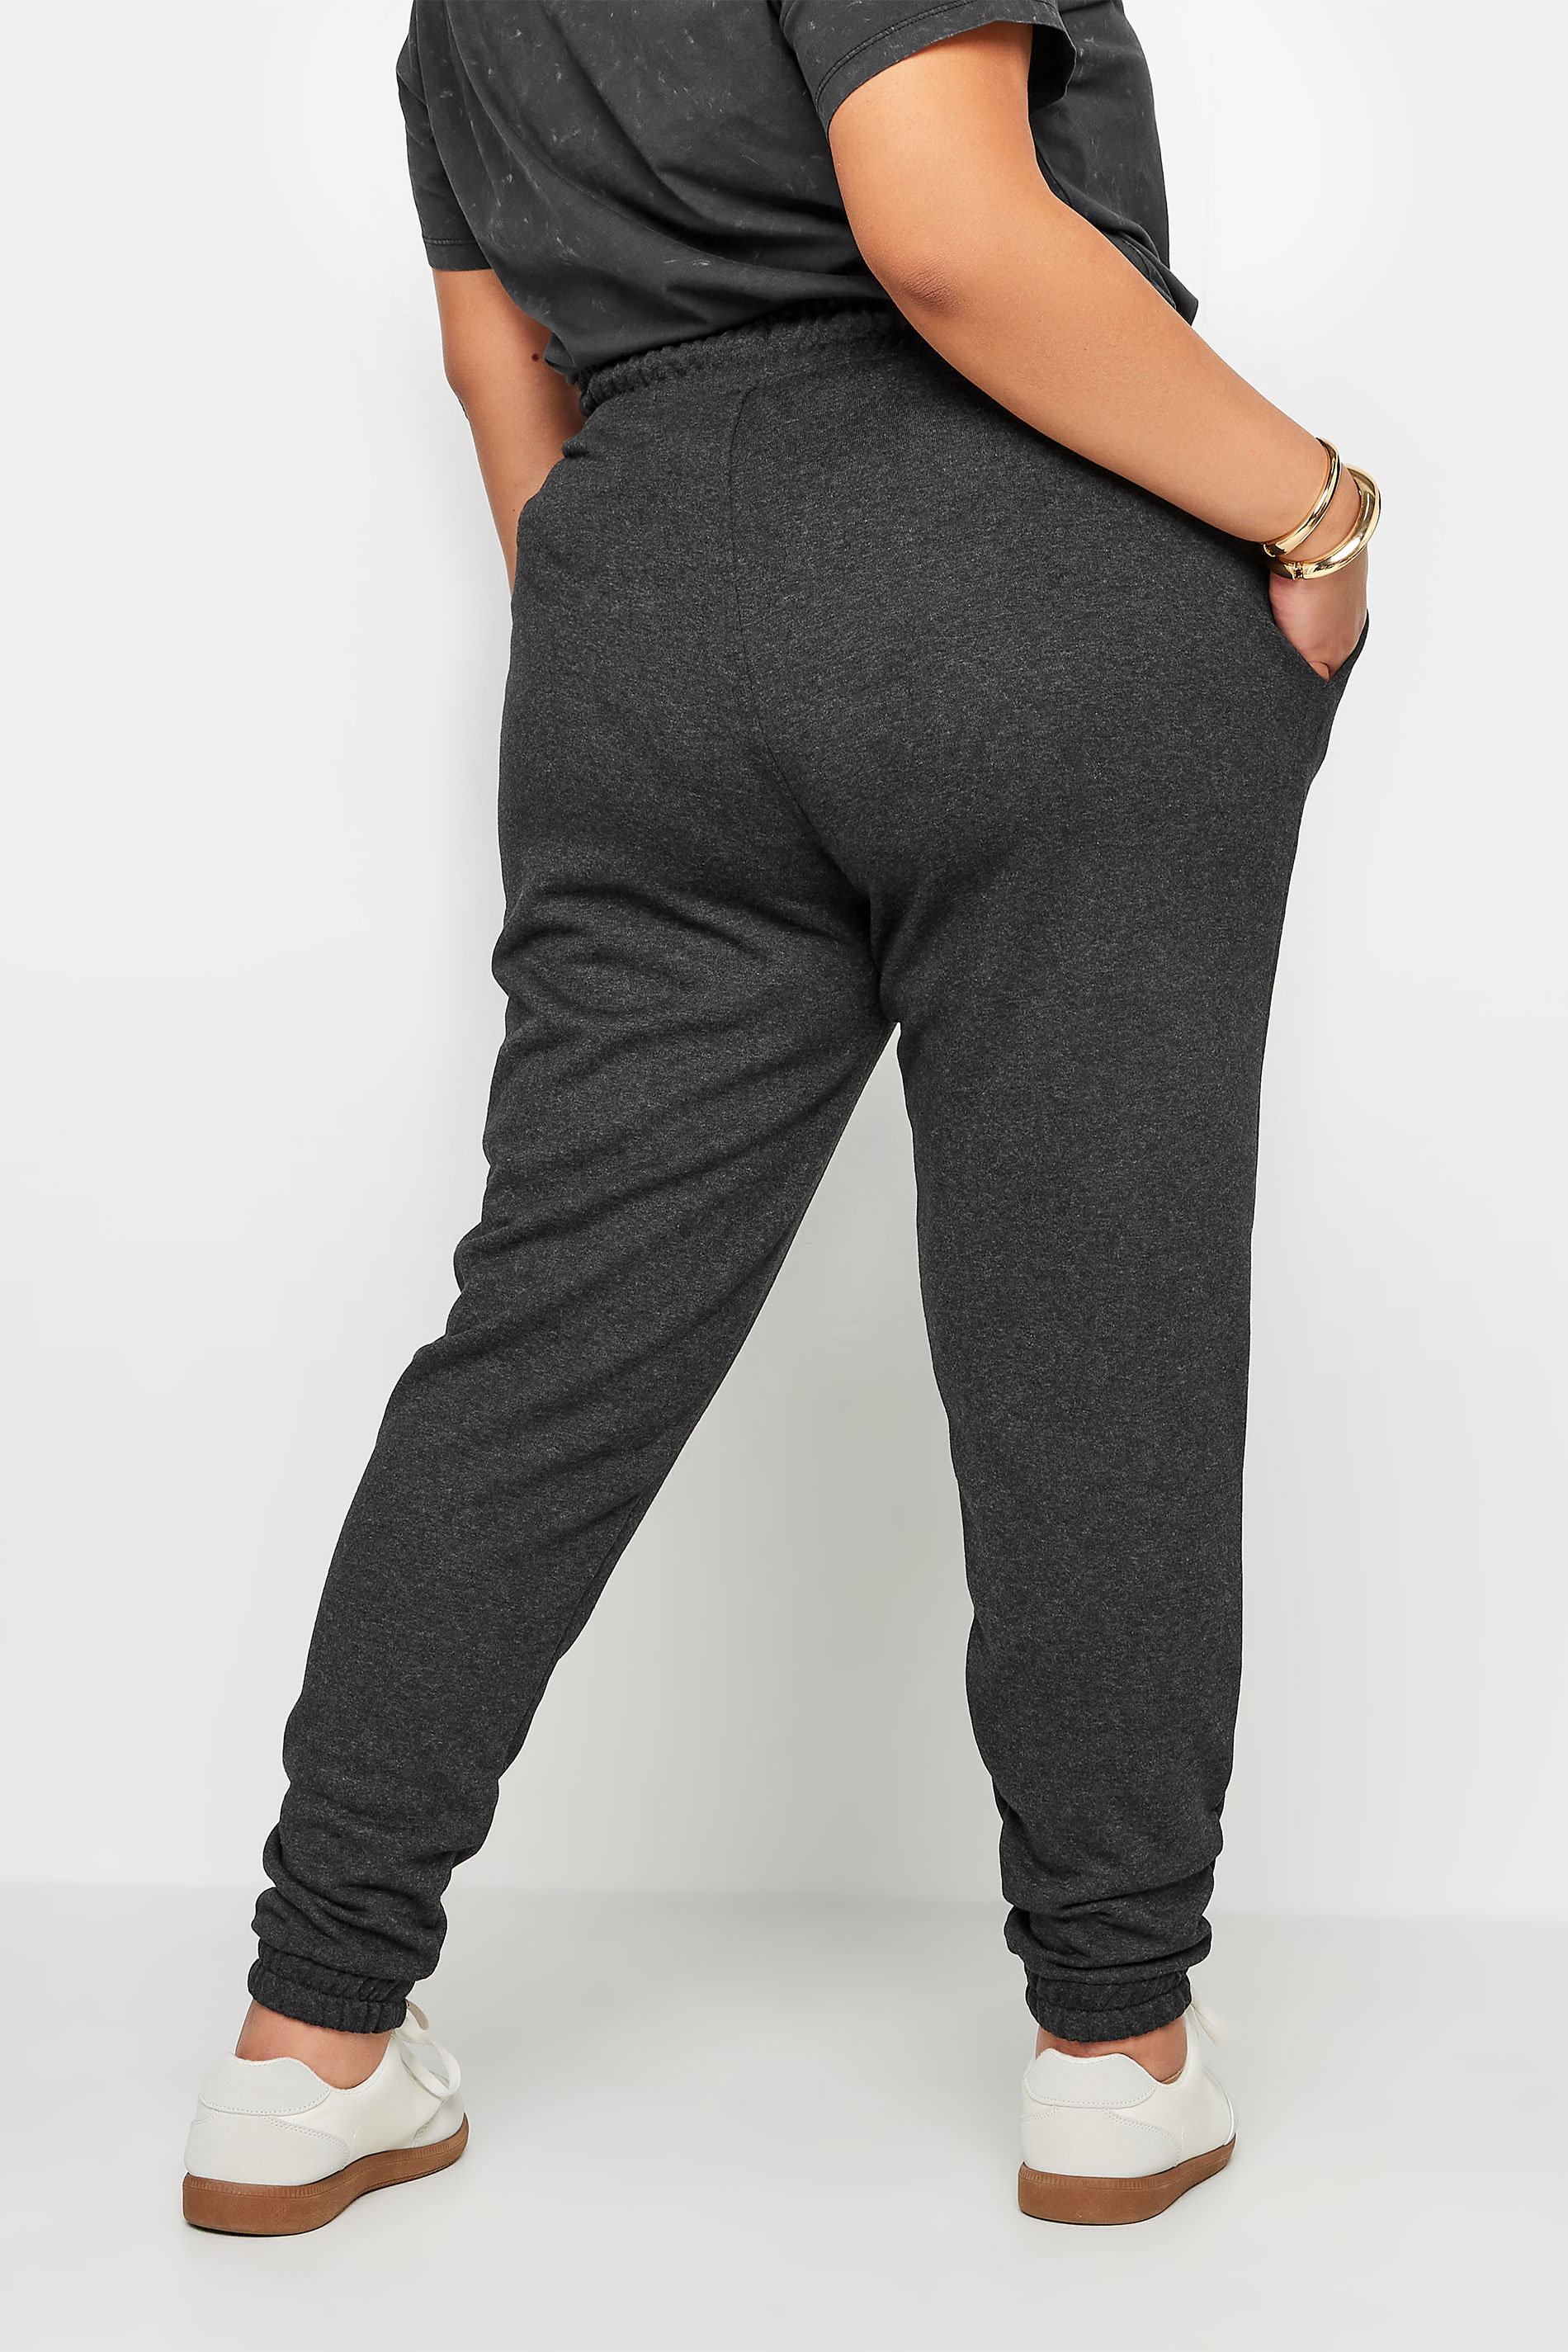 YOURS Plus Size Charcoal Grey Elasticated Joggers | Yours Clothing 3